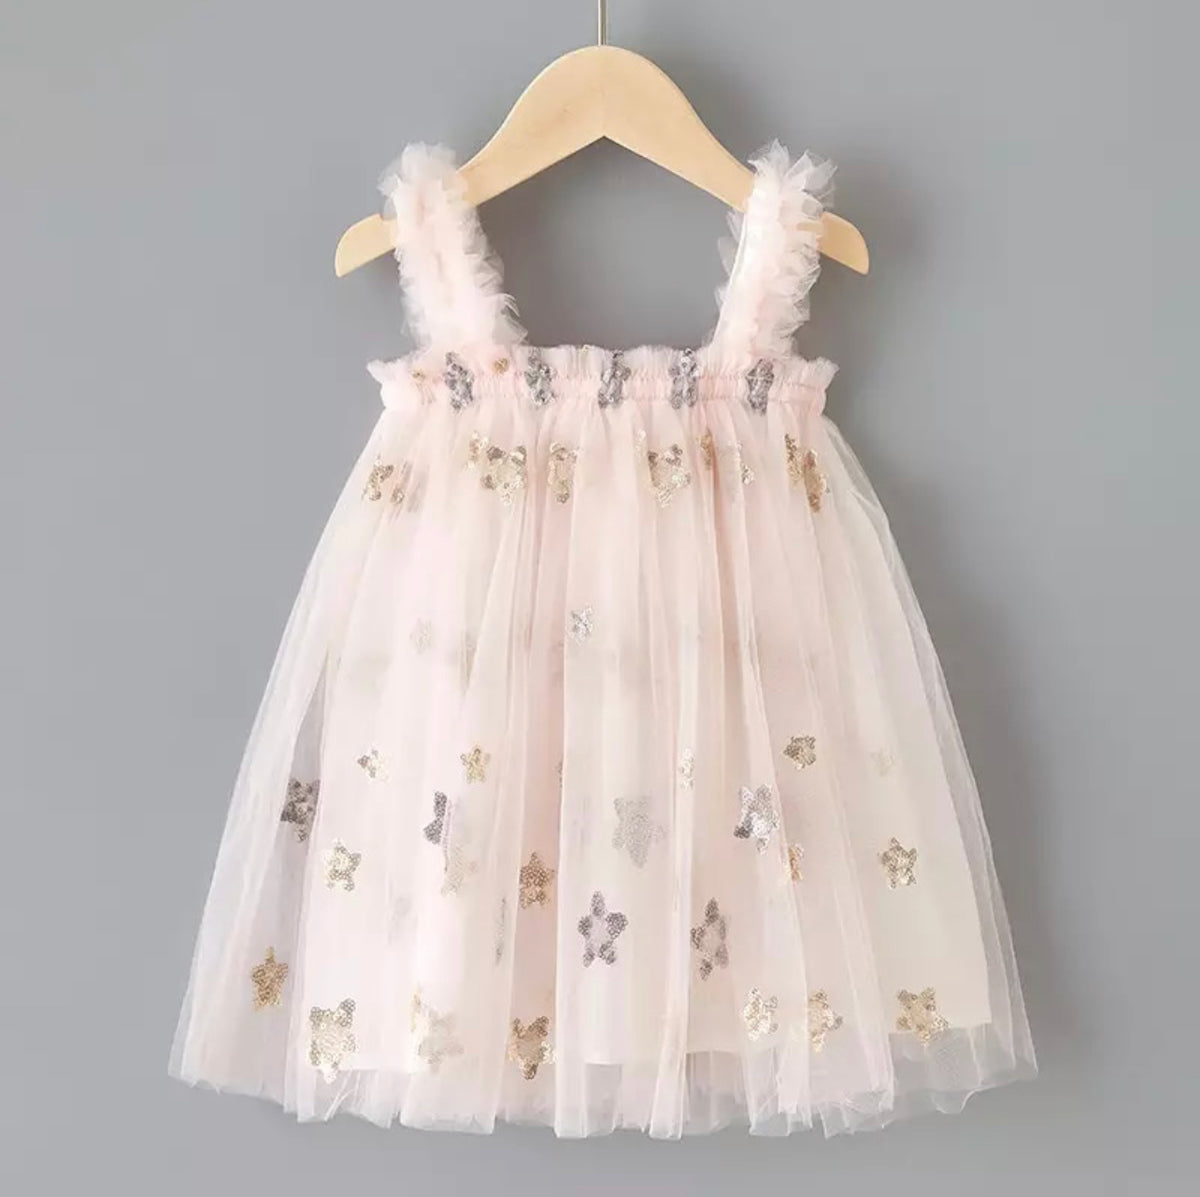 Tulle Star Dreams Dress in Soft Pink